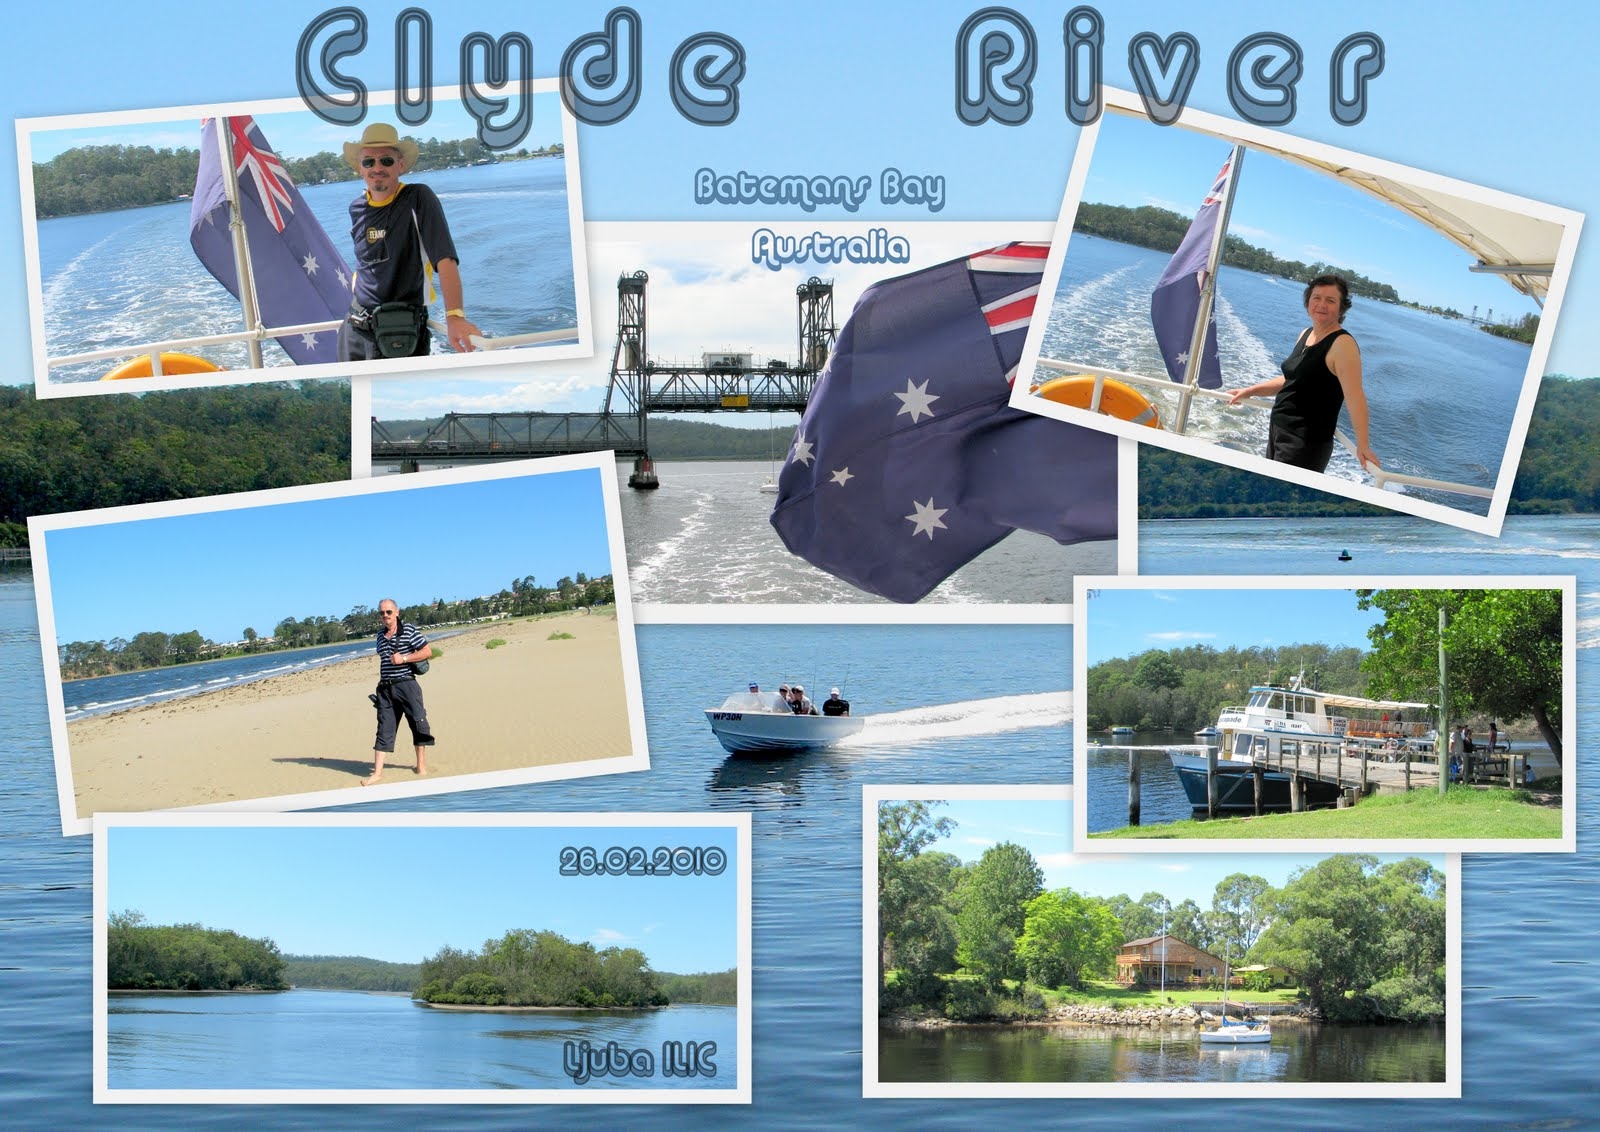 Clyde River